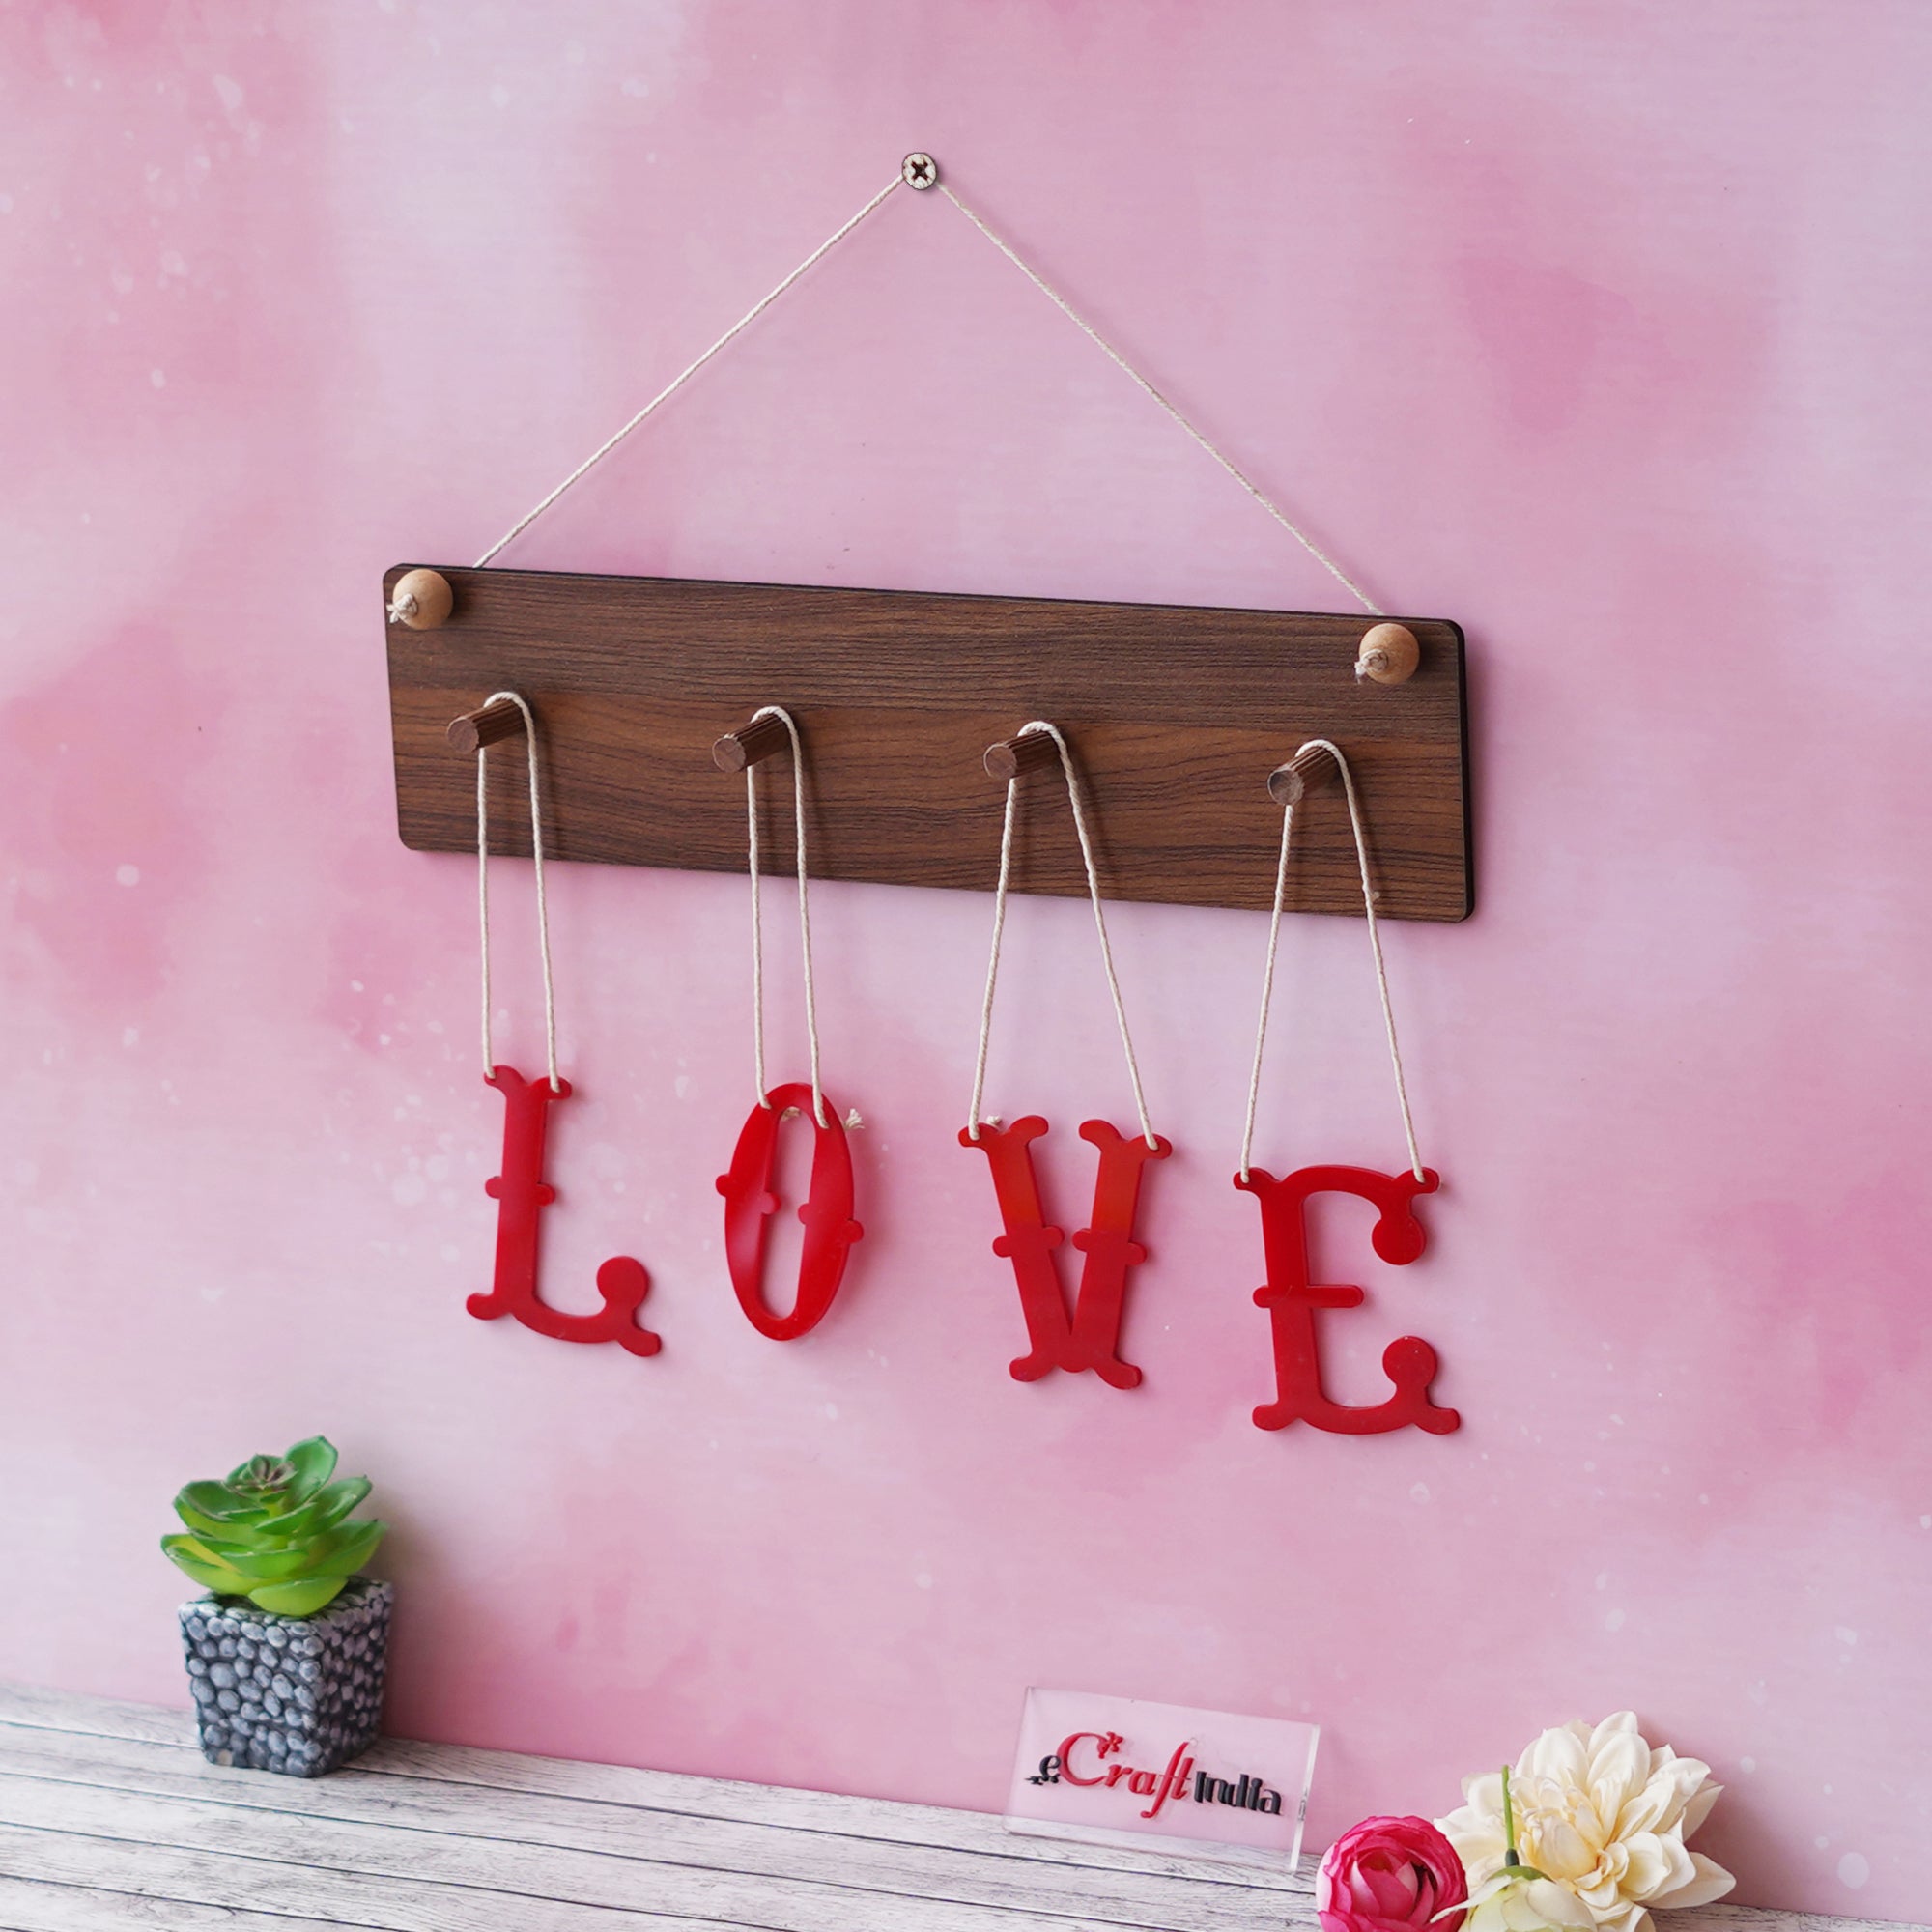 Brown & Red "LOVE" Sign Wooden Wall Hanging Showpiece